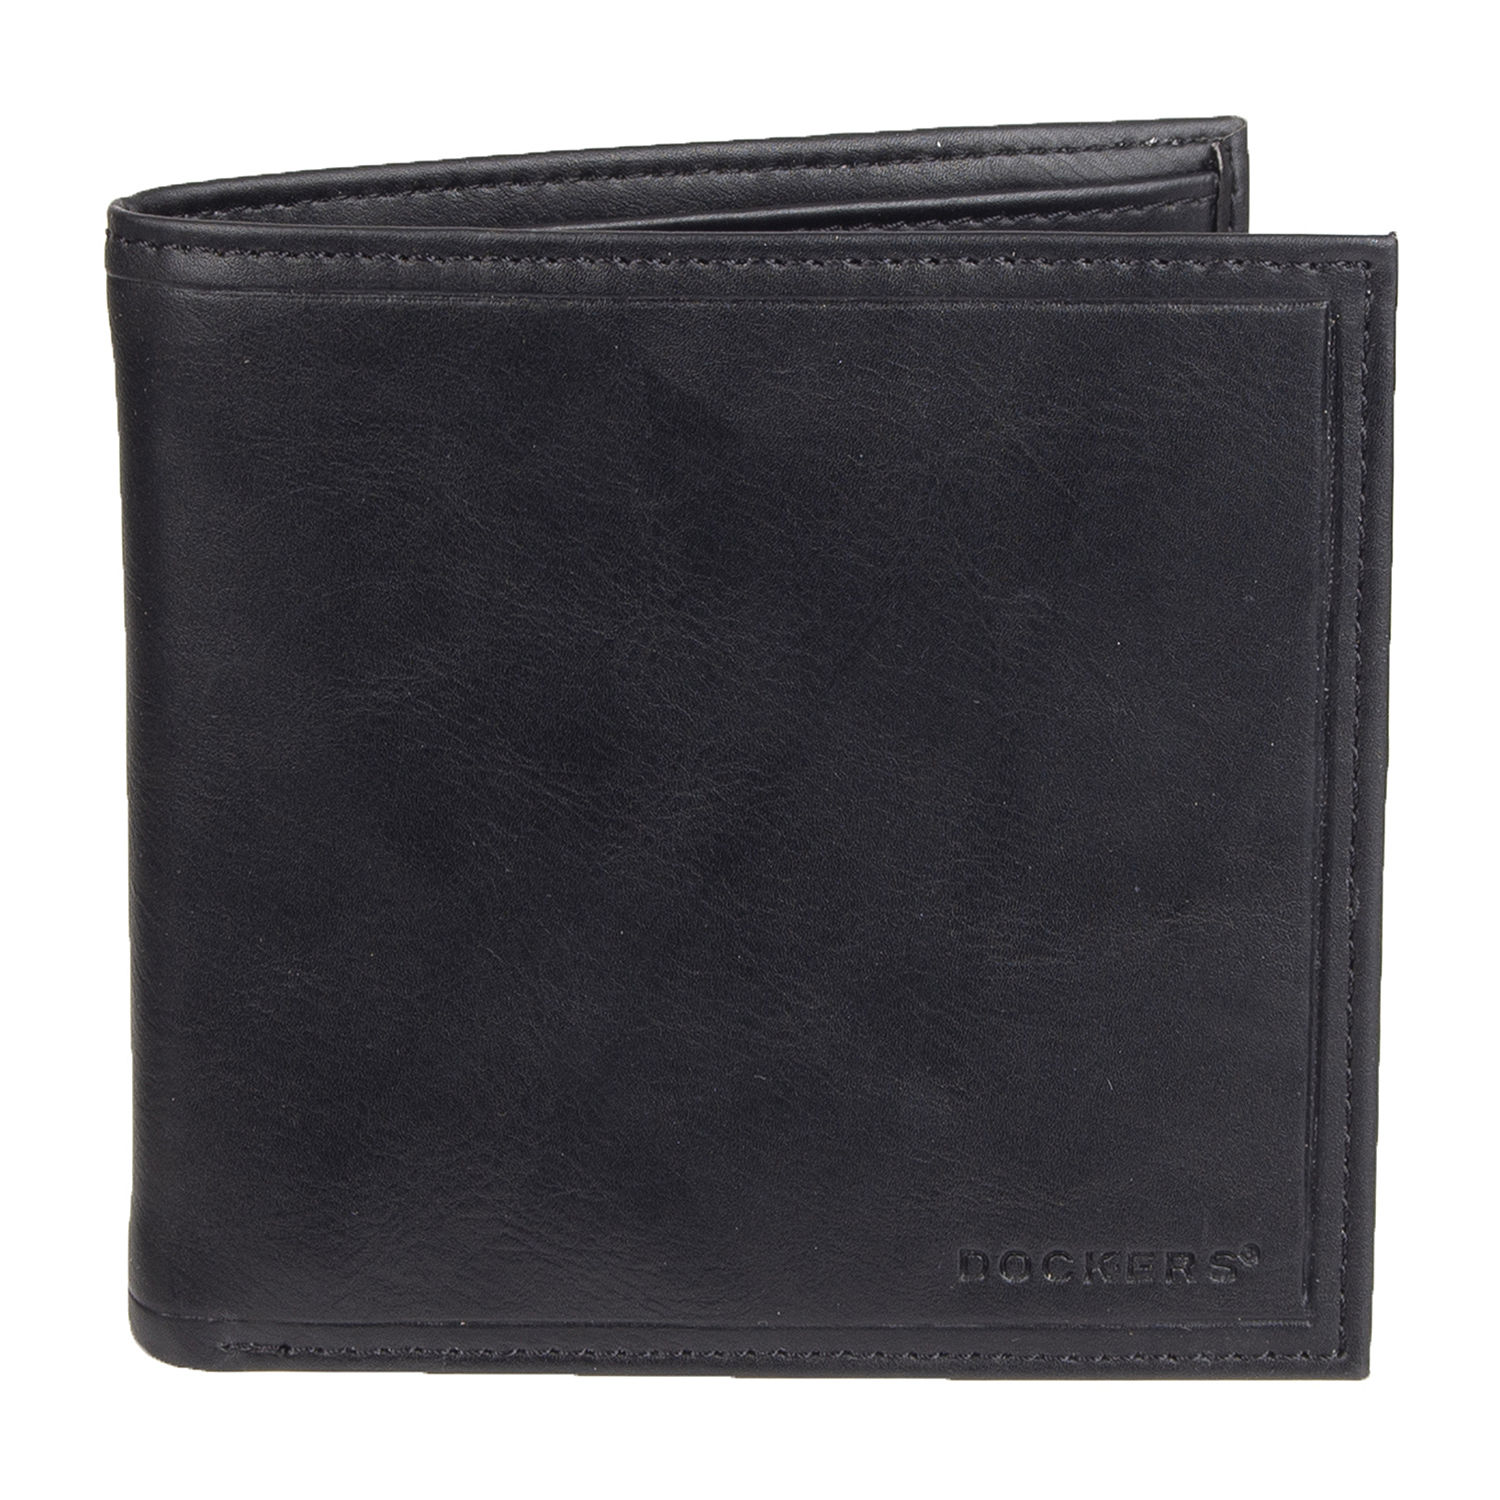 Dockers Wallet, Color: Black - JCPenney